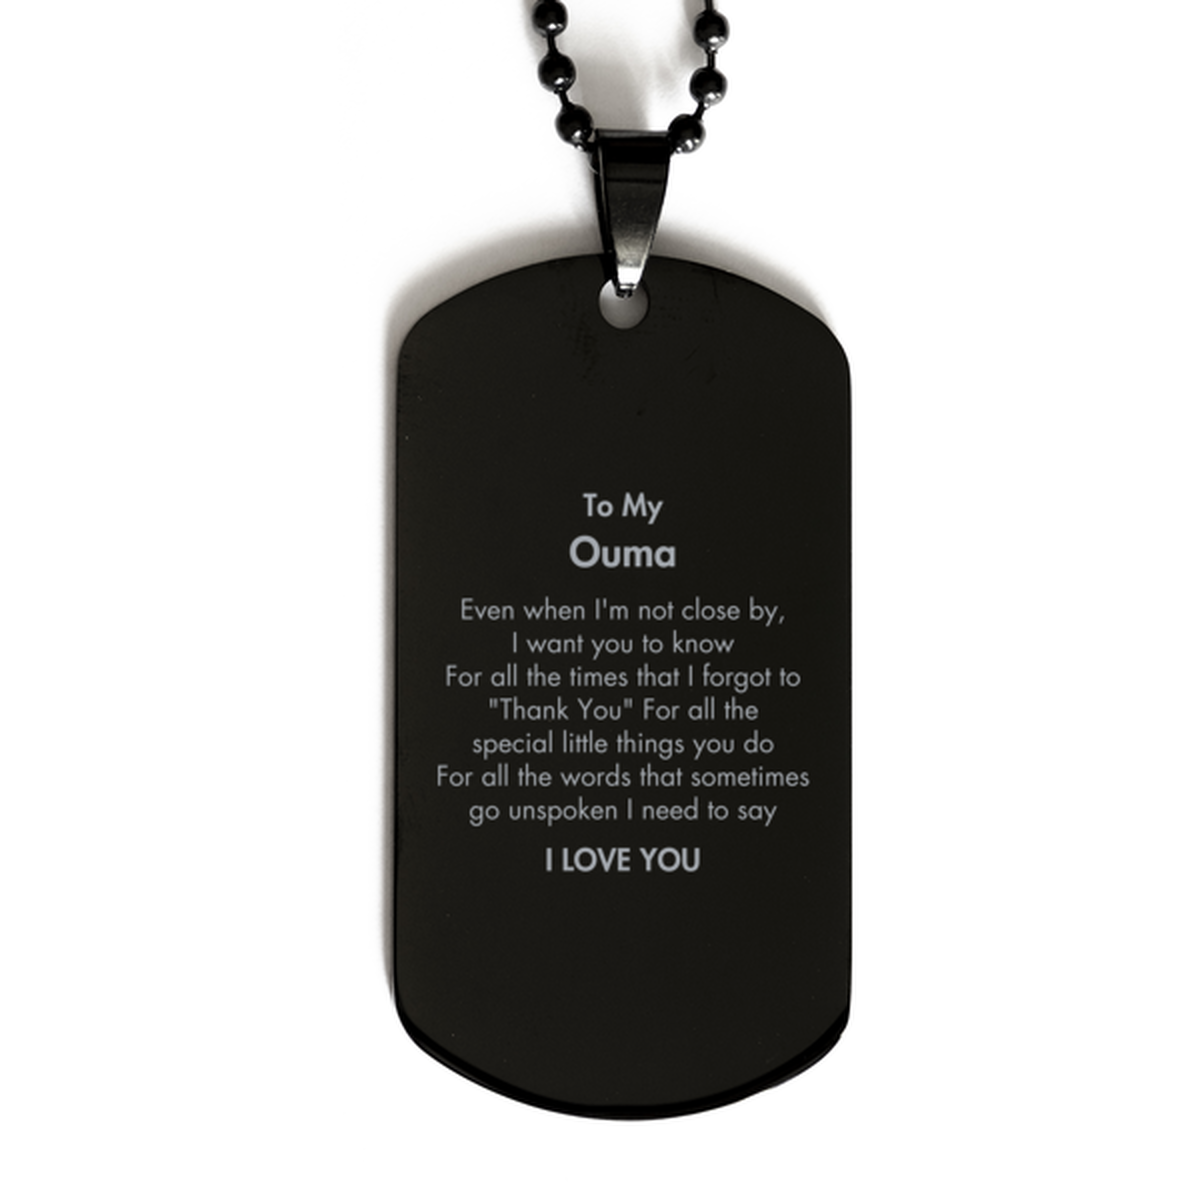 Thank You Gifts for Ouma, Keepsake Black Dog Tag Gifts for Ouma Birthday Mother's day Father's Day Ouma For all the words That sometimes go unspoken I need to say I LOVE YOU